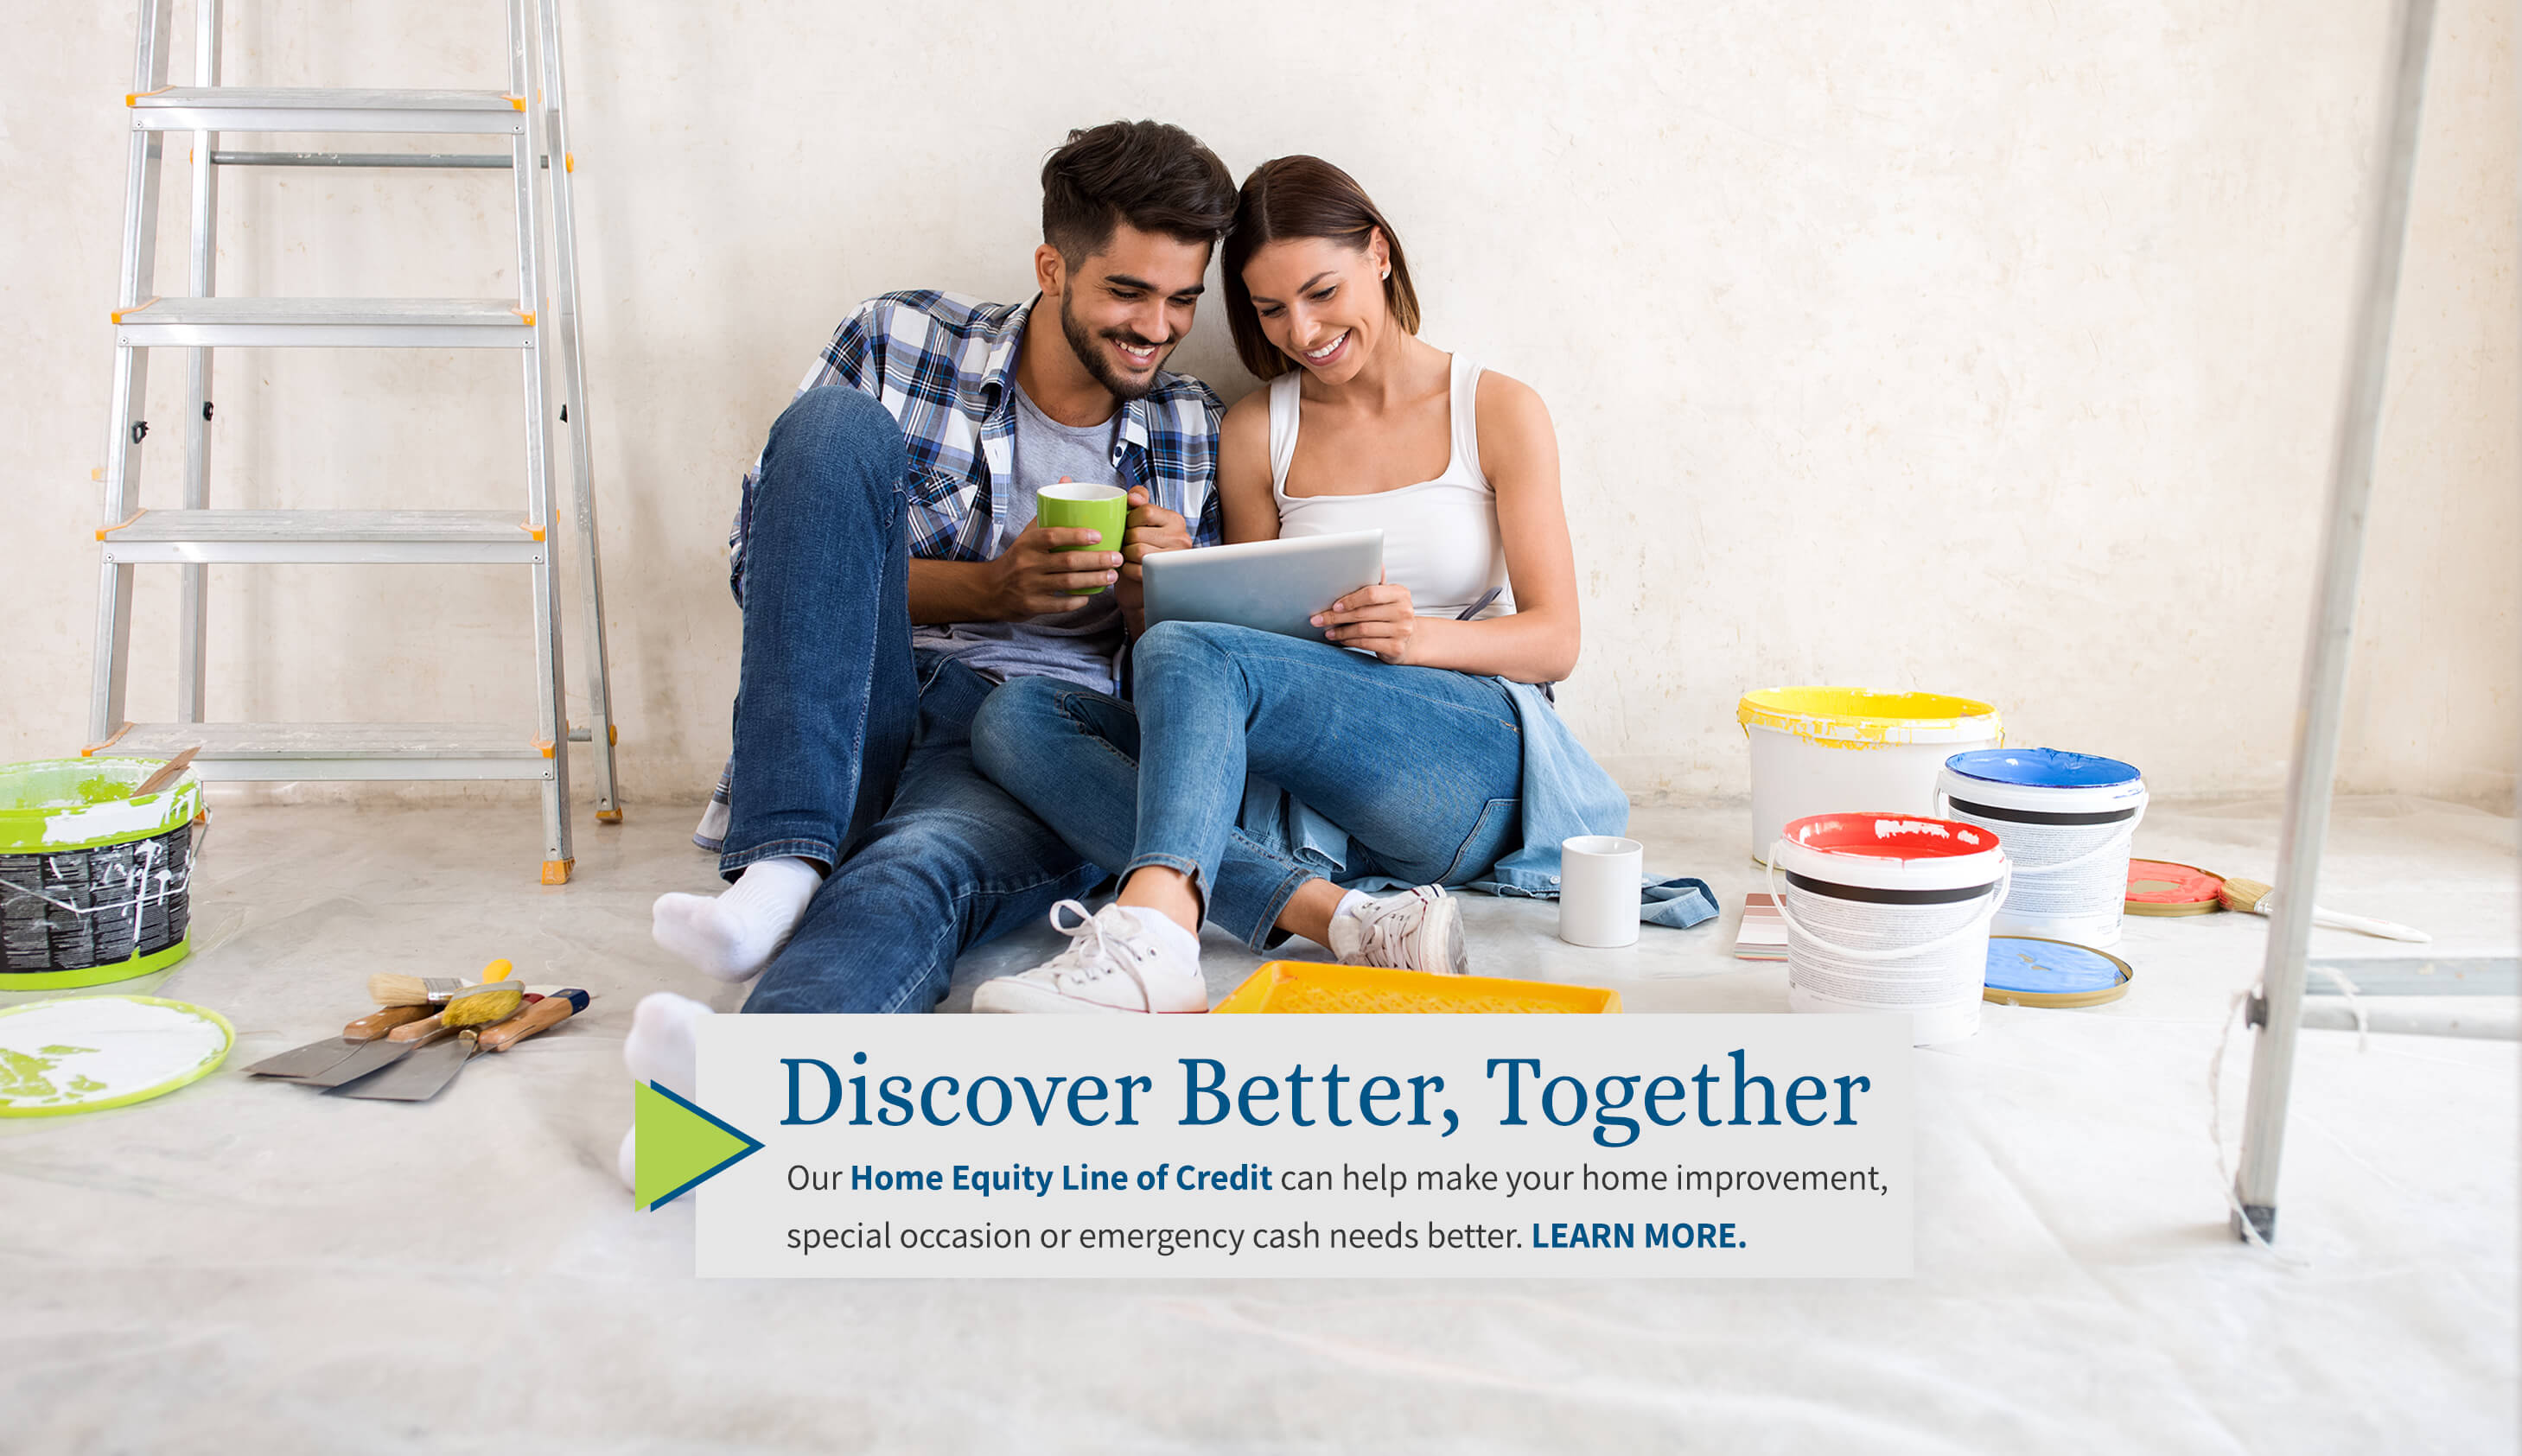 Discover Better, Together. A better Home Equity Line-of-Credit for those home improvements, special occasions, or emergency cash needs. Learn More.